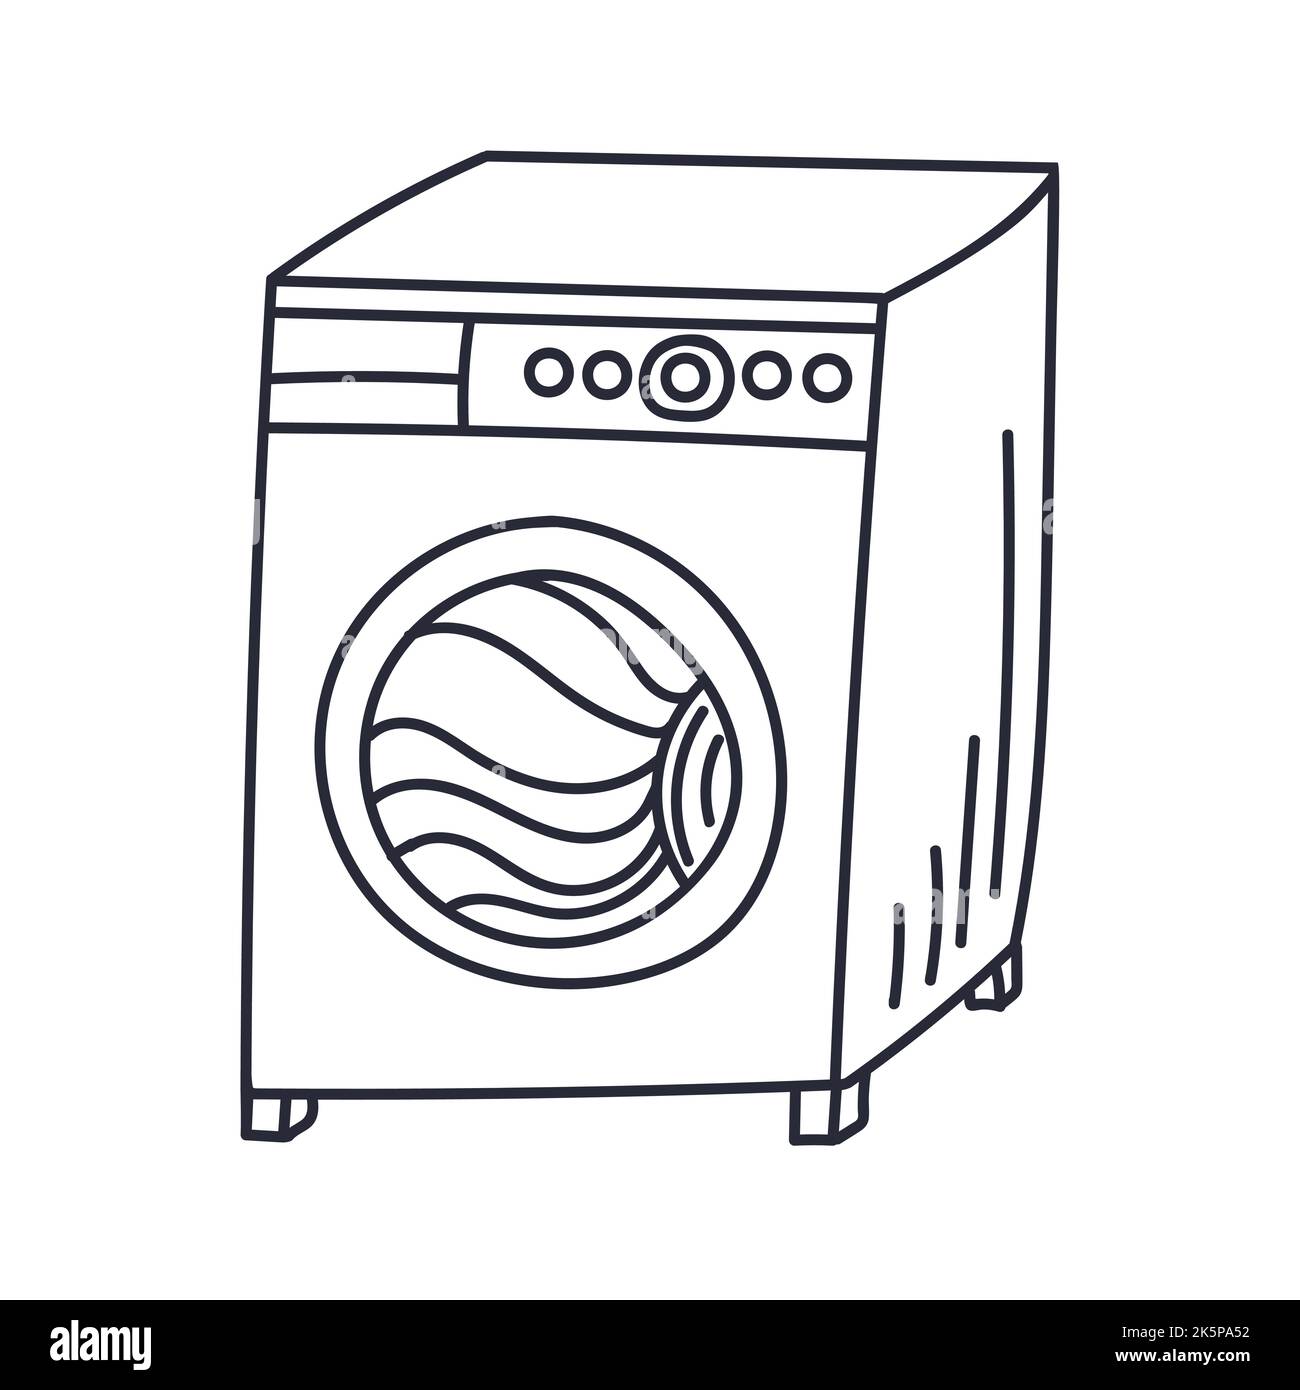 Vector illustration of a washing machine in hand drawn doodle style. Vector illustration Stock Vector